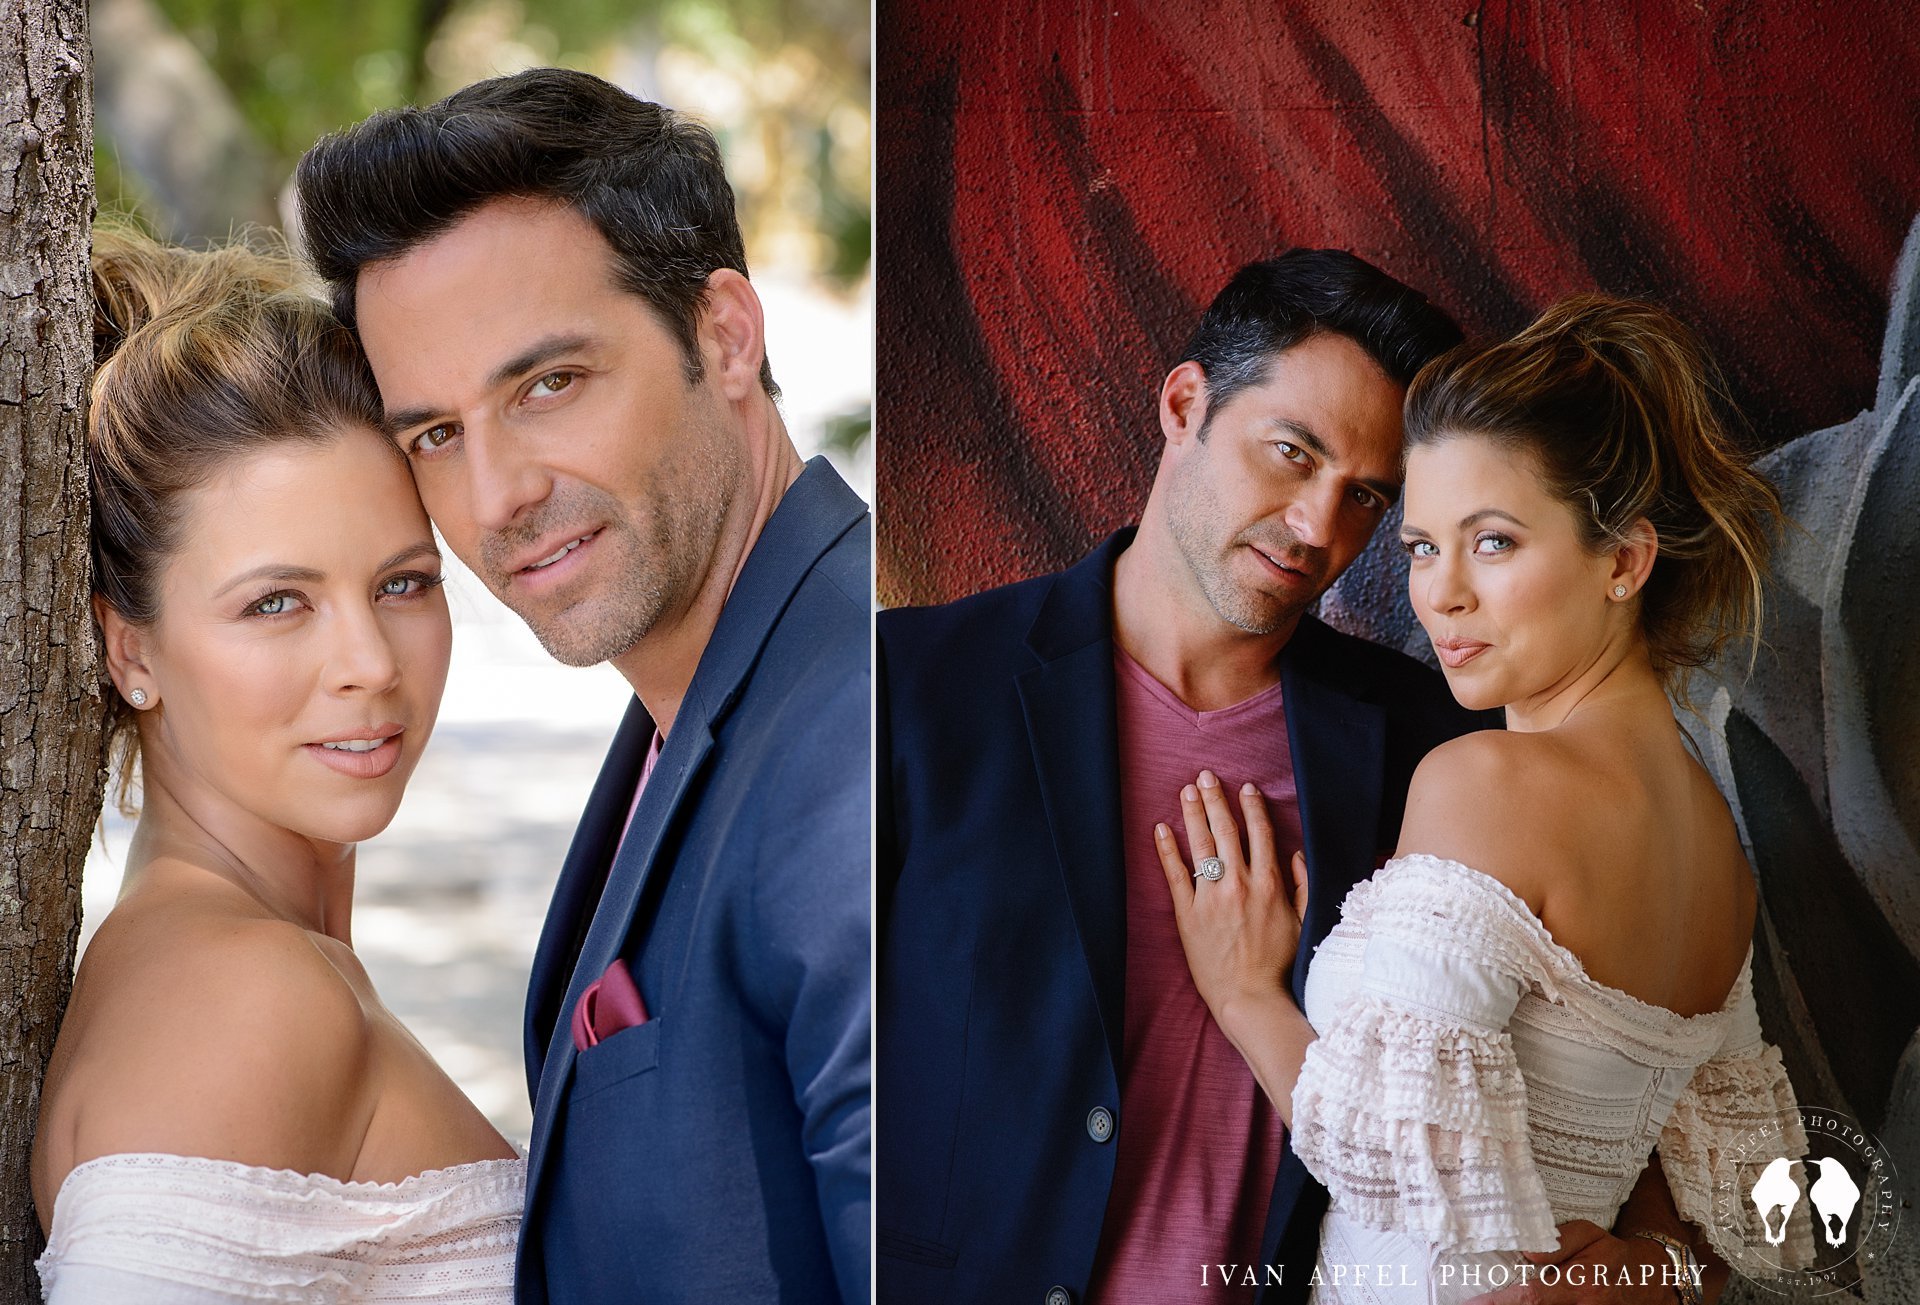 ximena duque and jay adkins engagement session ivan apfel photography miami_0030.jpg